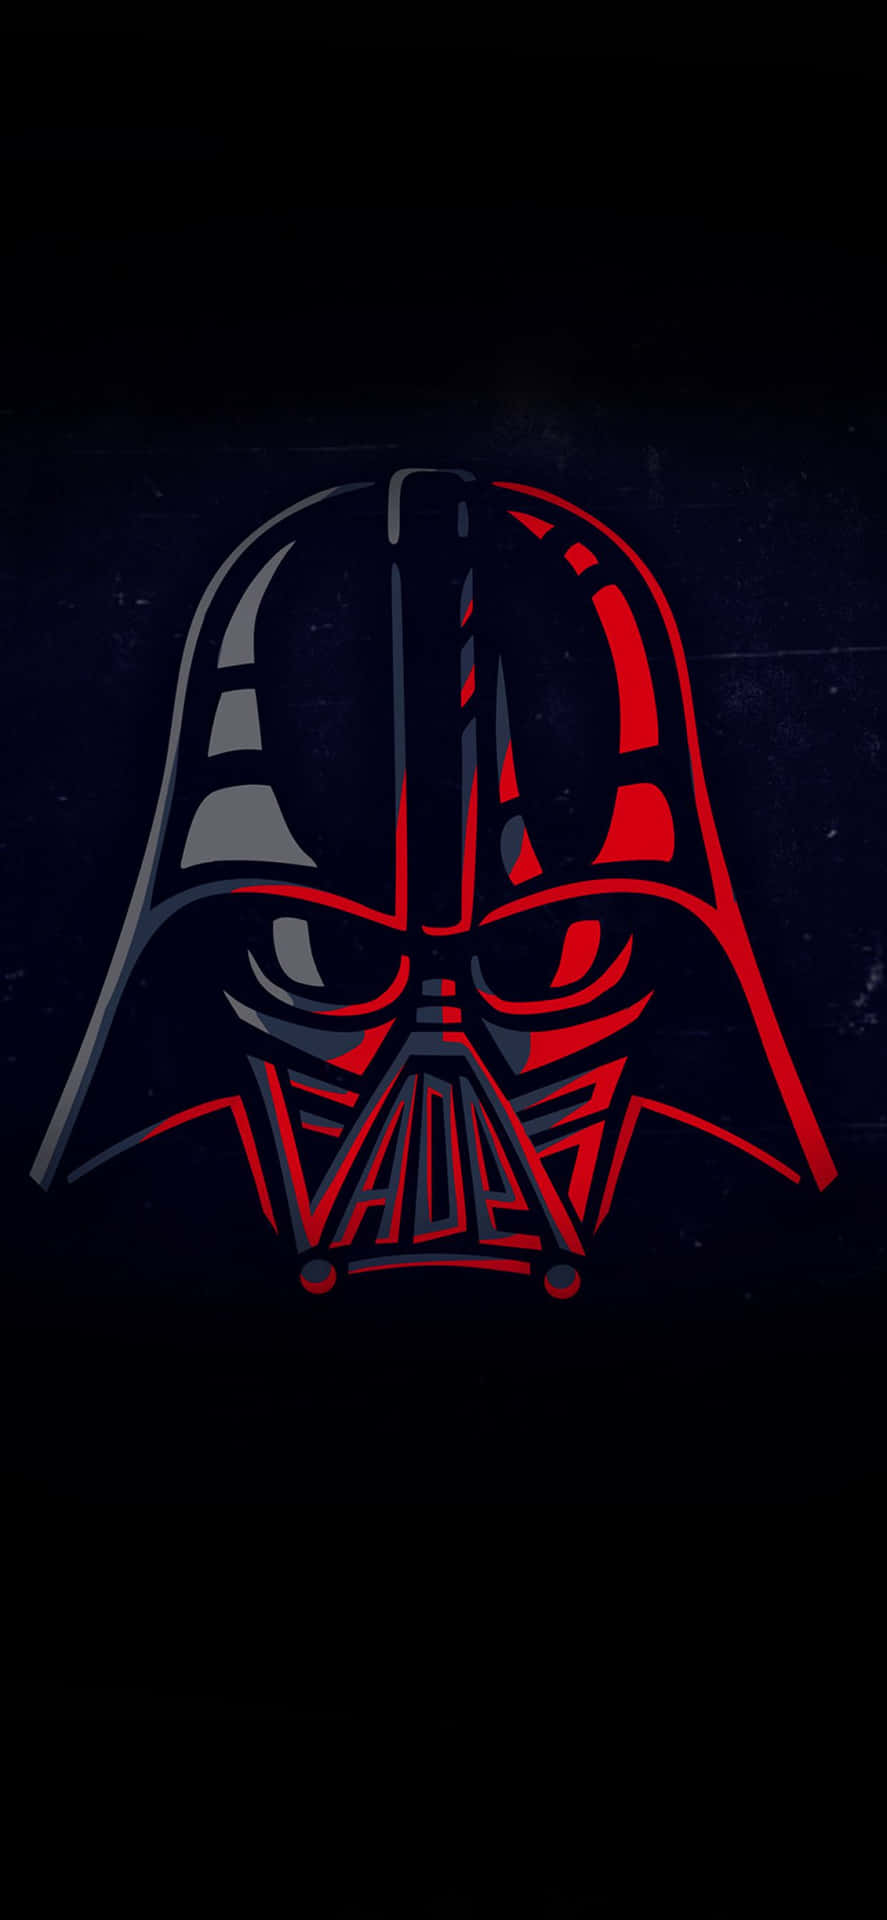 Feel the force of Darth Vader with this iPhone! Wallpaper